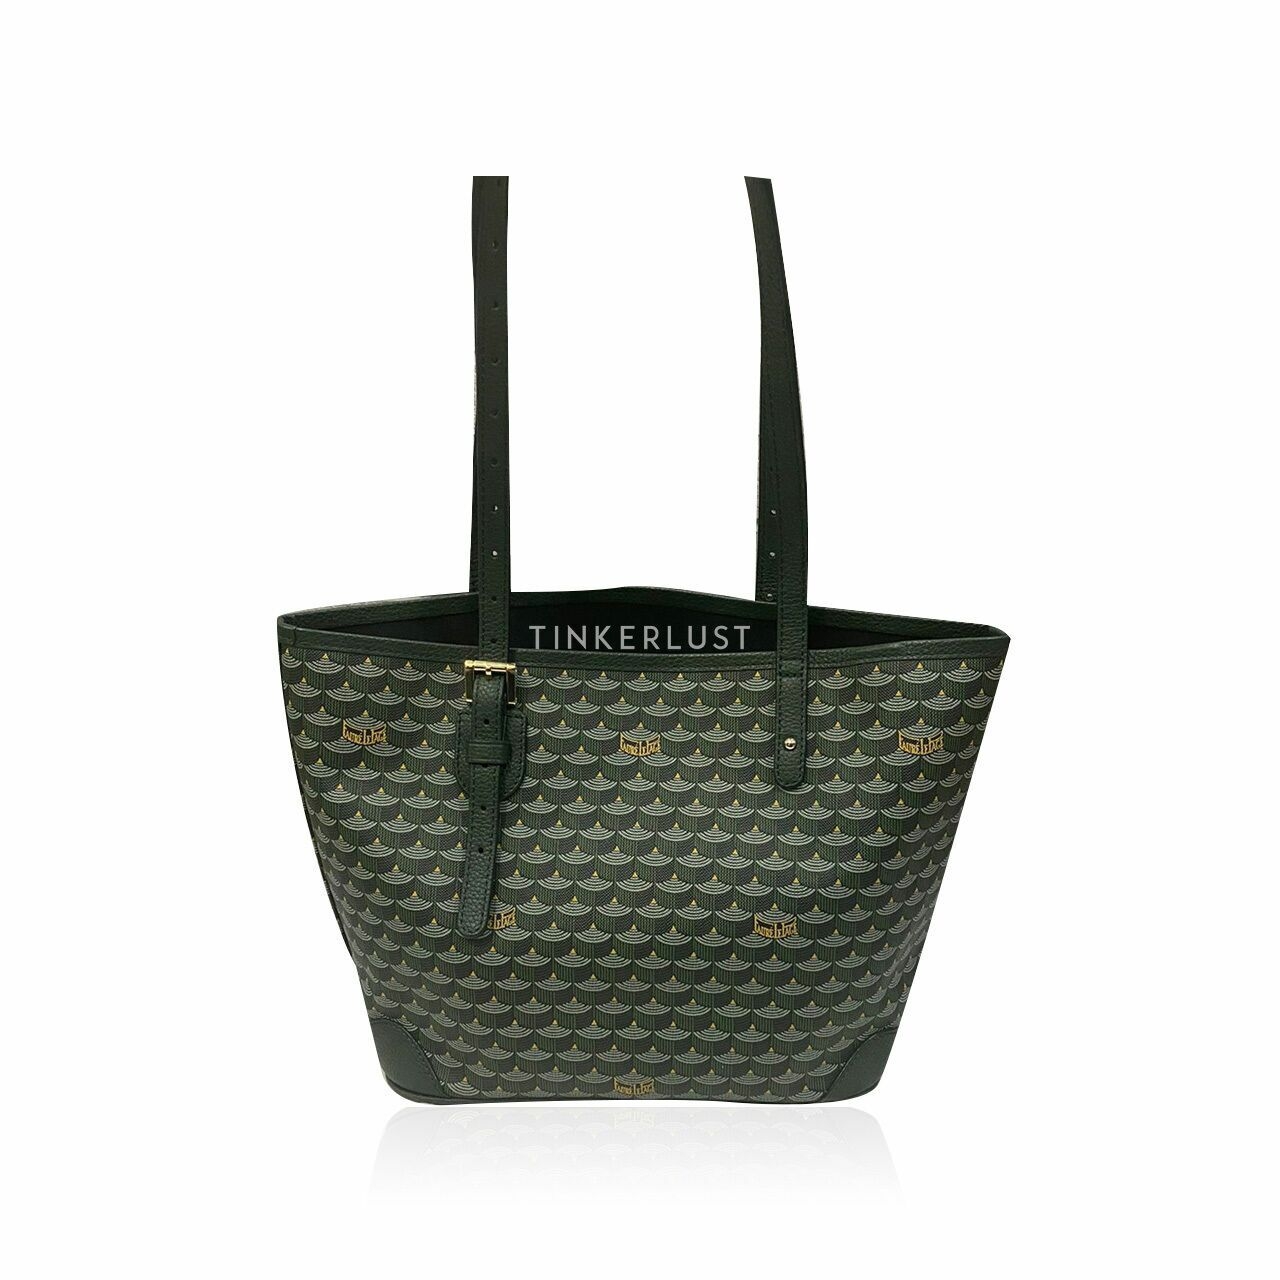 Faure Le Page Daily Battle Green Tote Bag SHW 